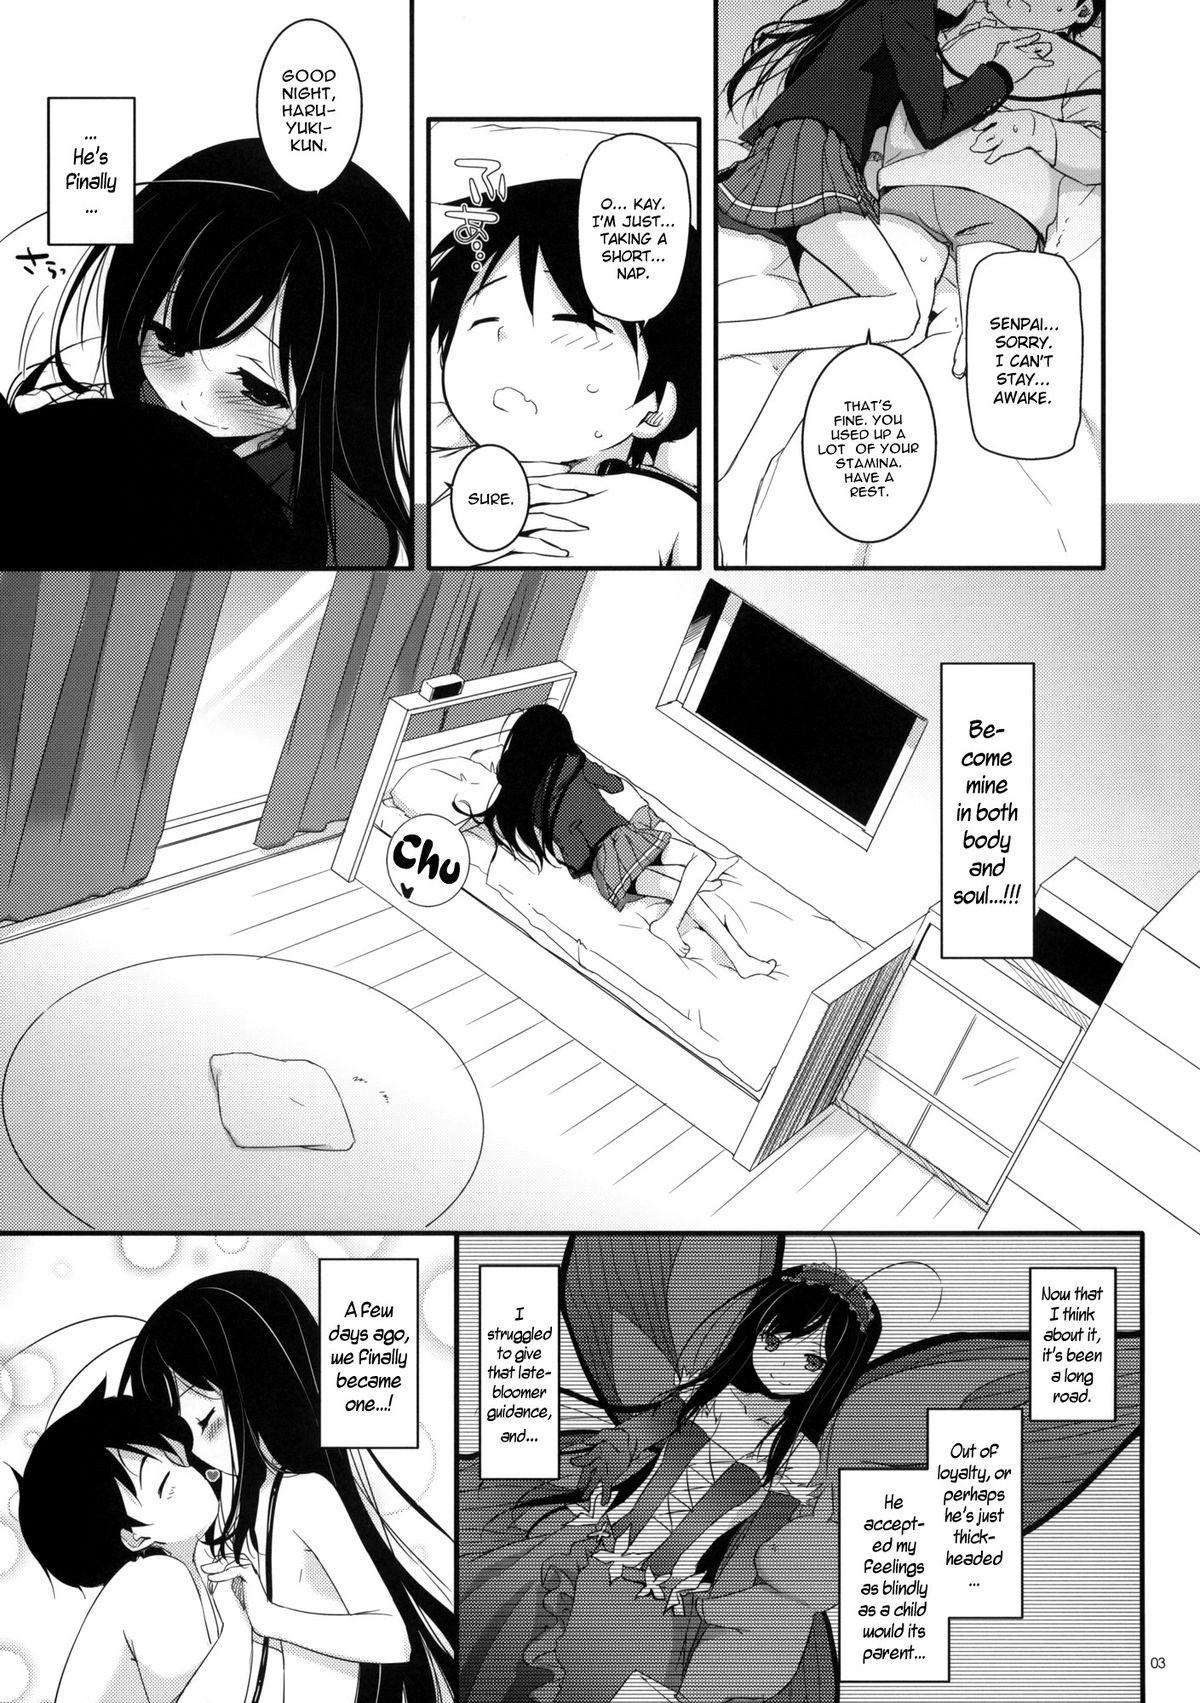 Mature Woman D.L. action 68 - Accel world Culo - Page 2